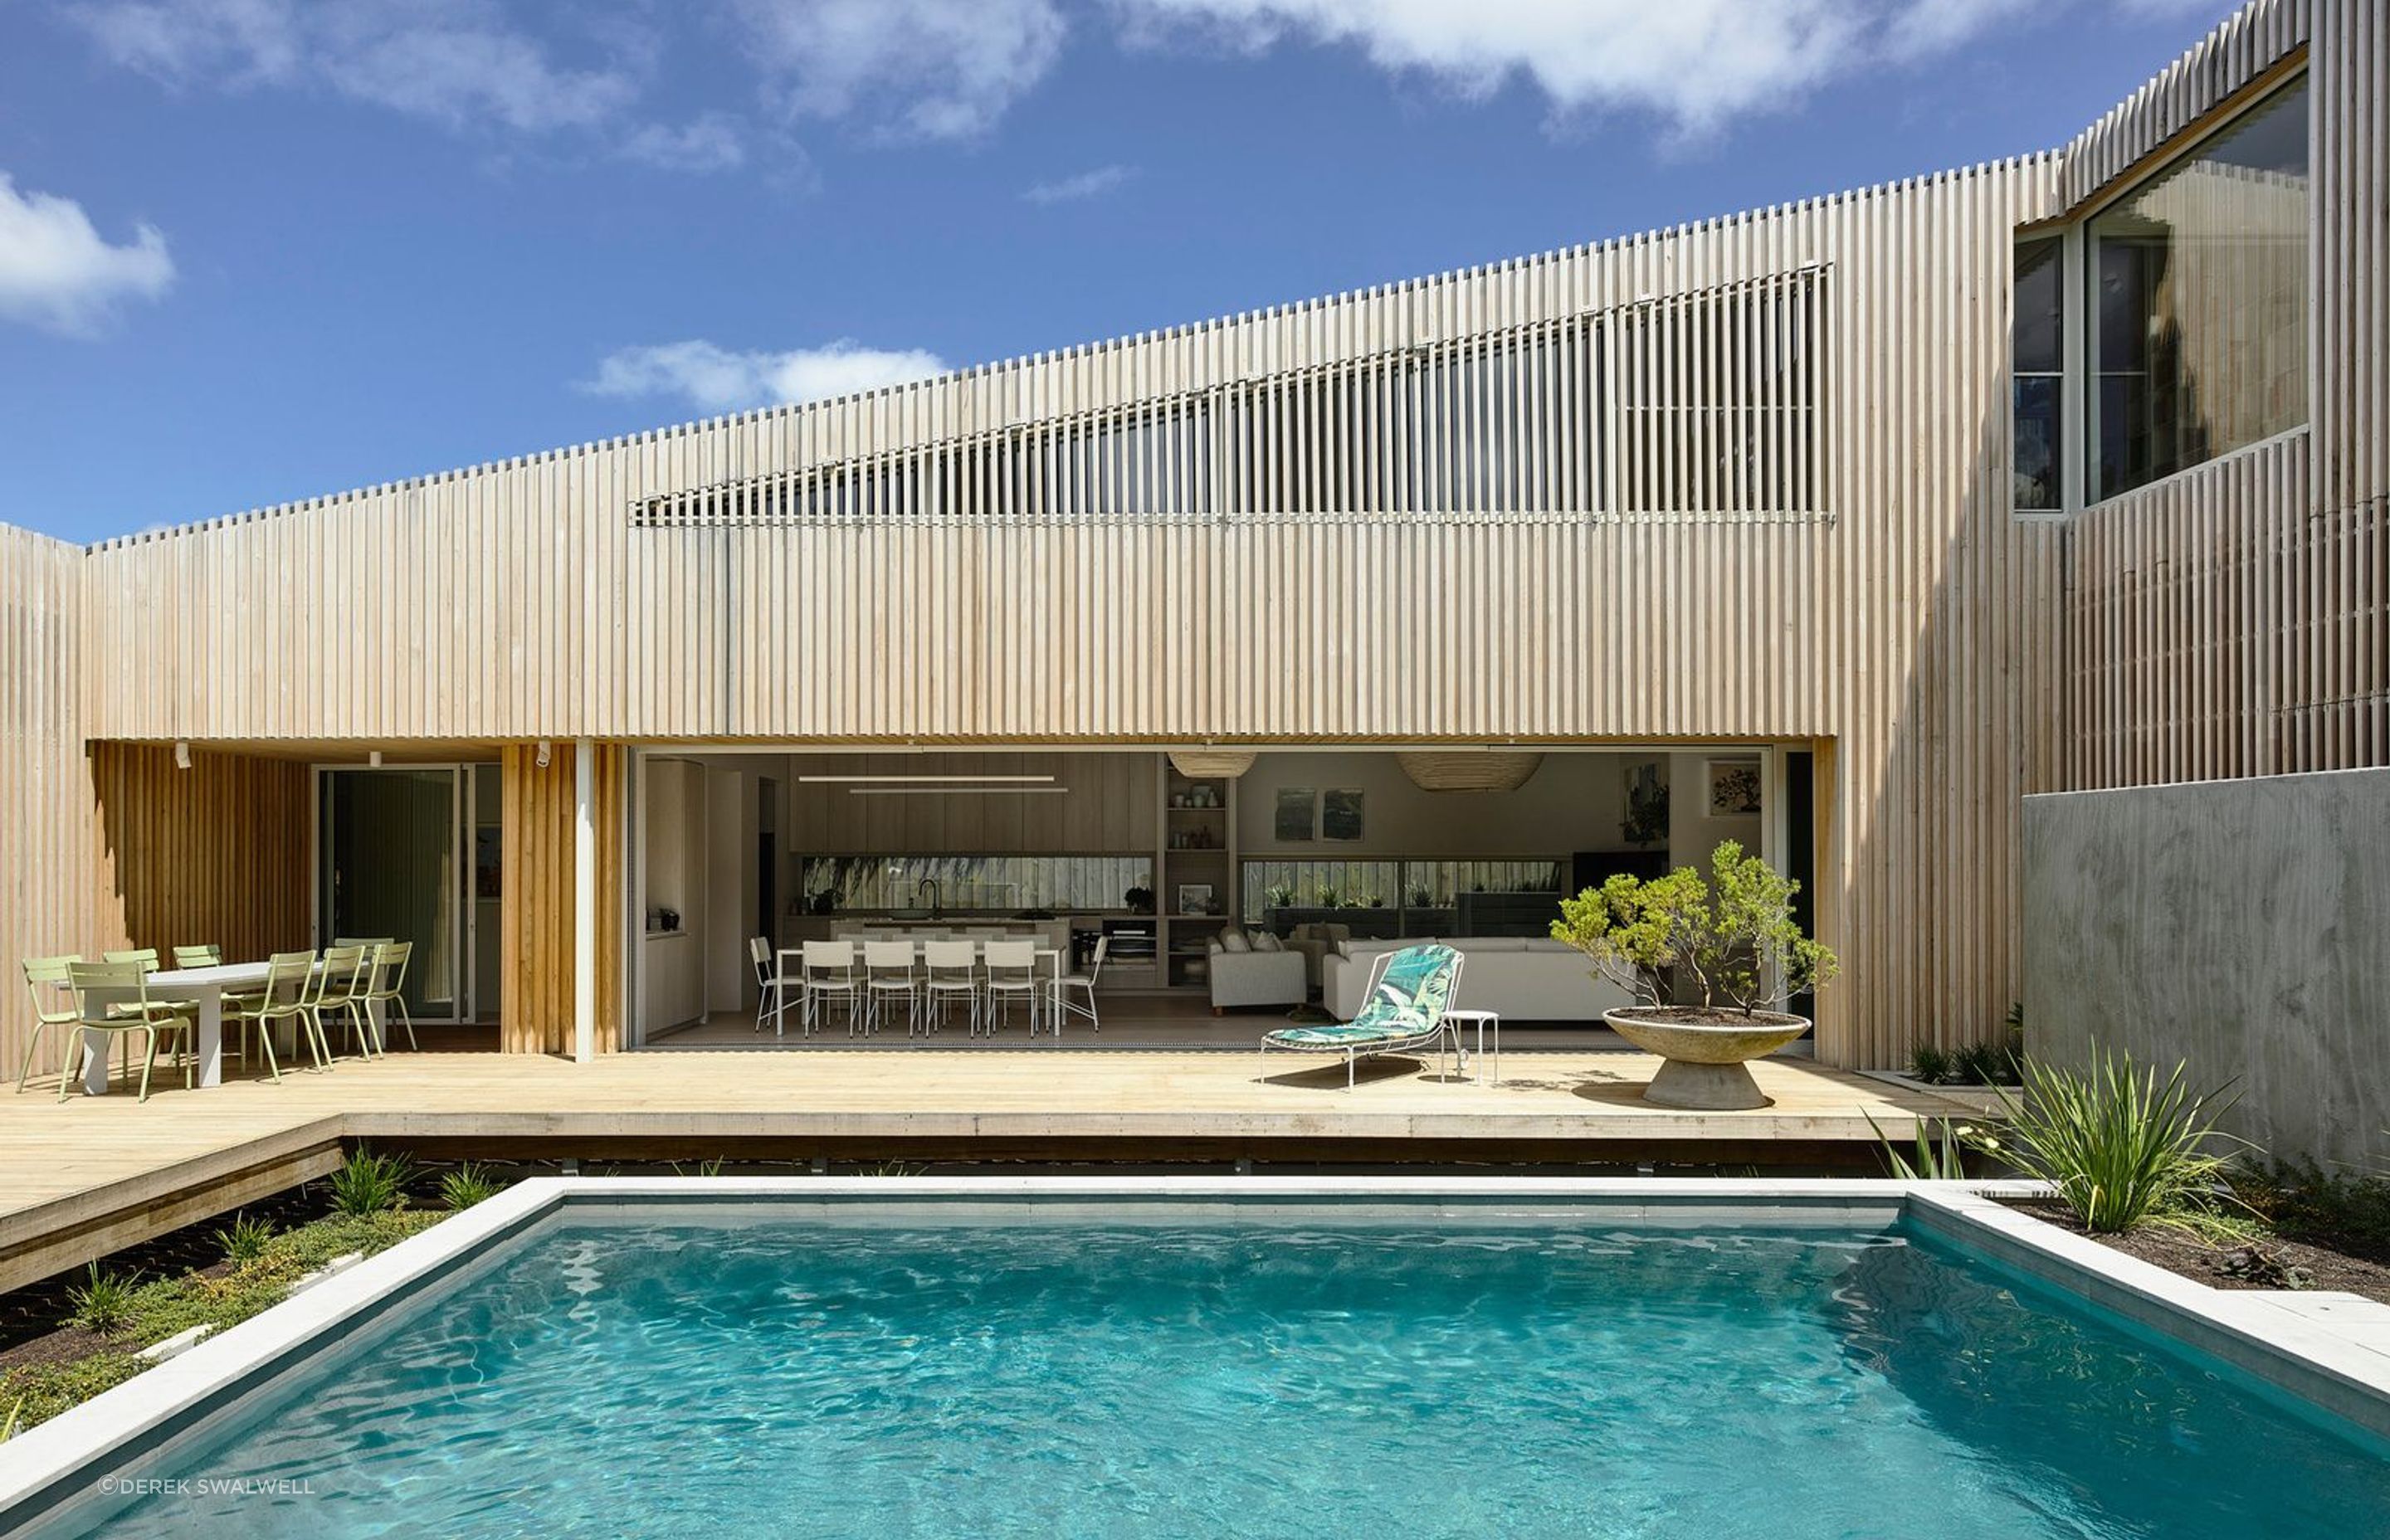 This property in Portsea created a view with the design of an inward-looking viewpoint.